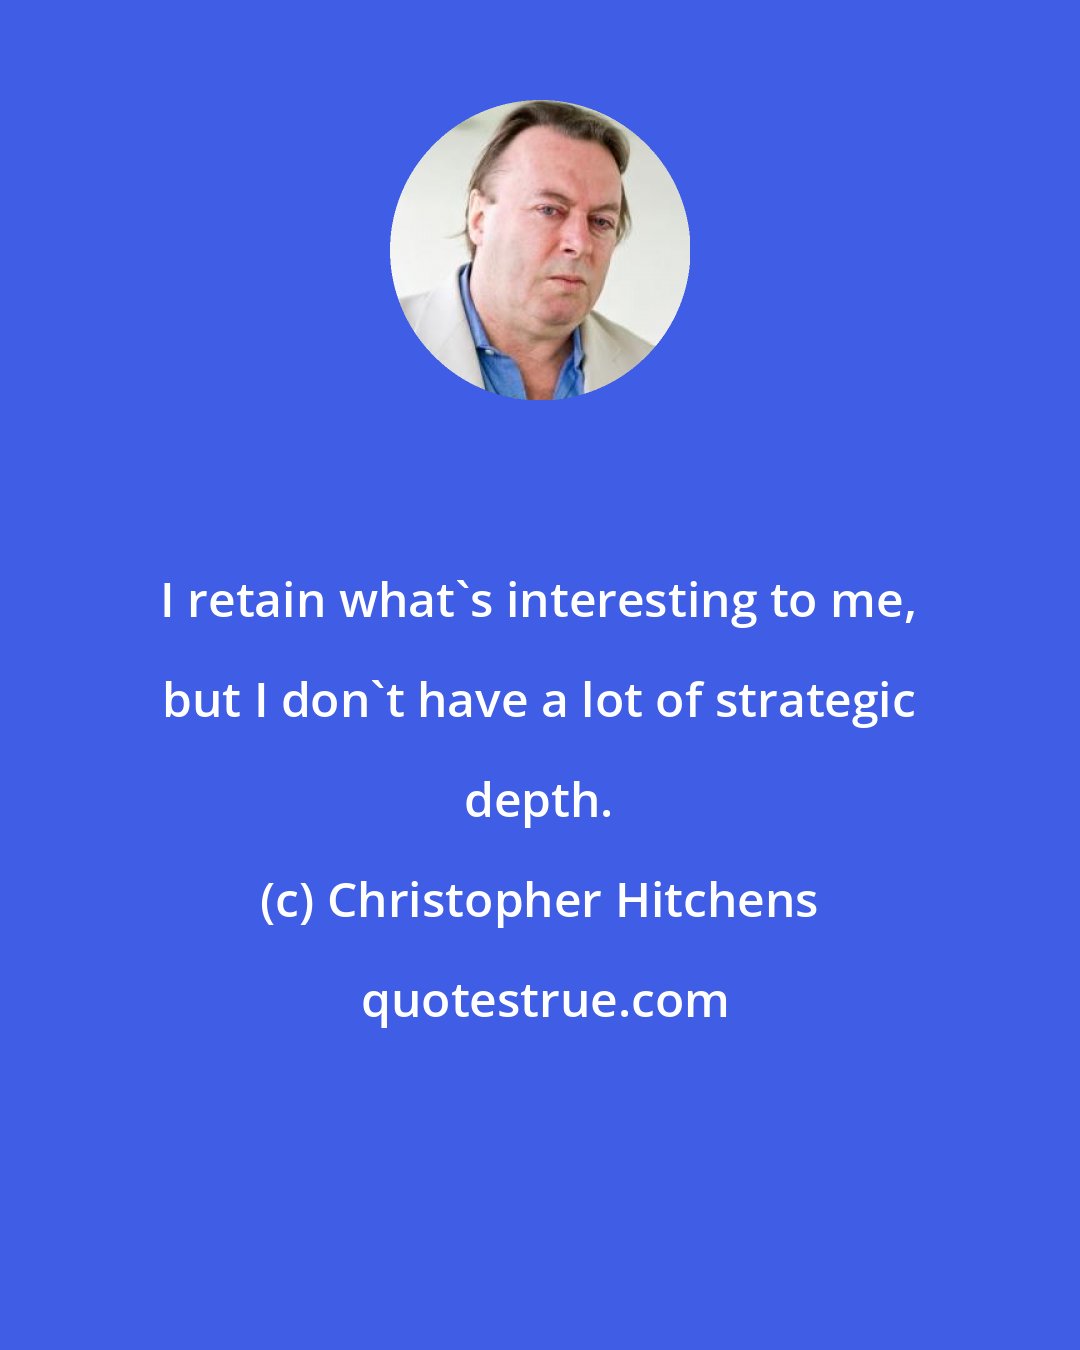 Christopher Hitchens: I retain what's interesting to me, but I don't have a lot of strategic depth.